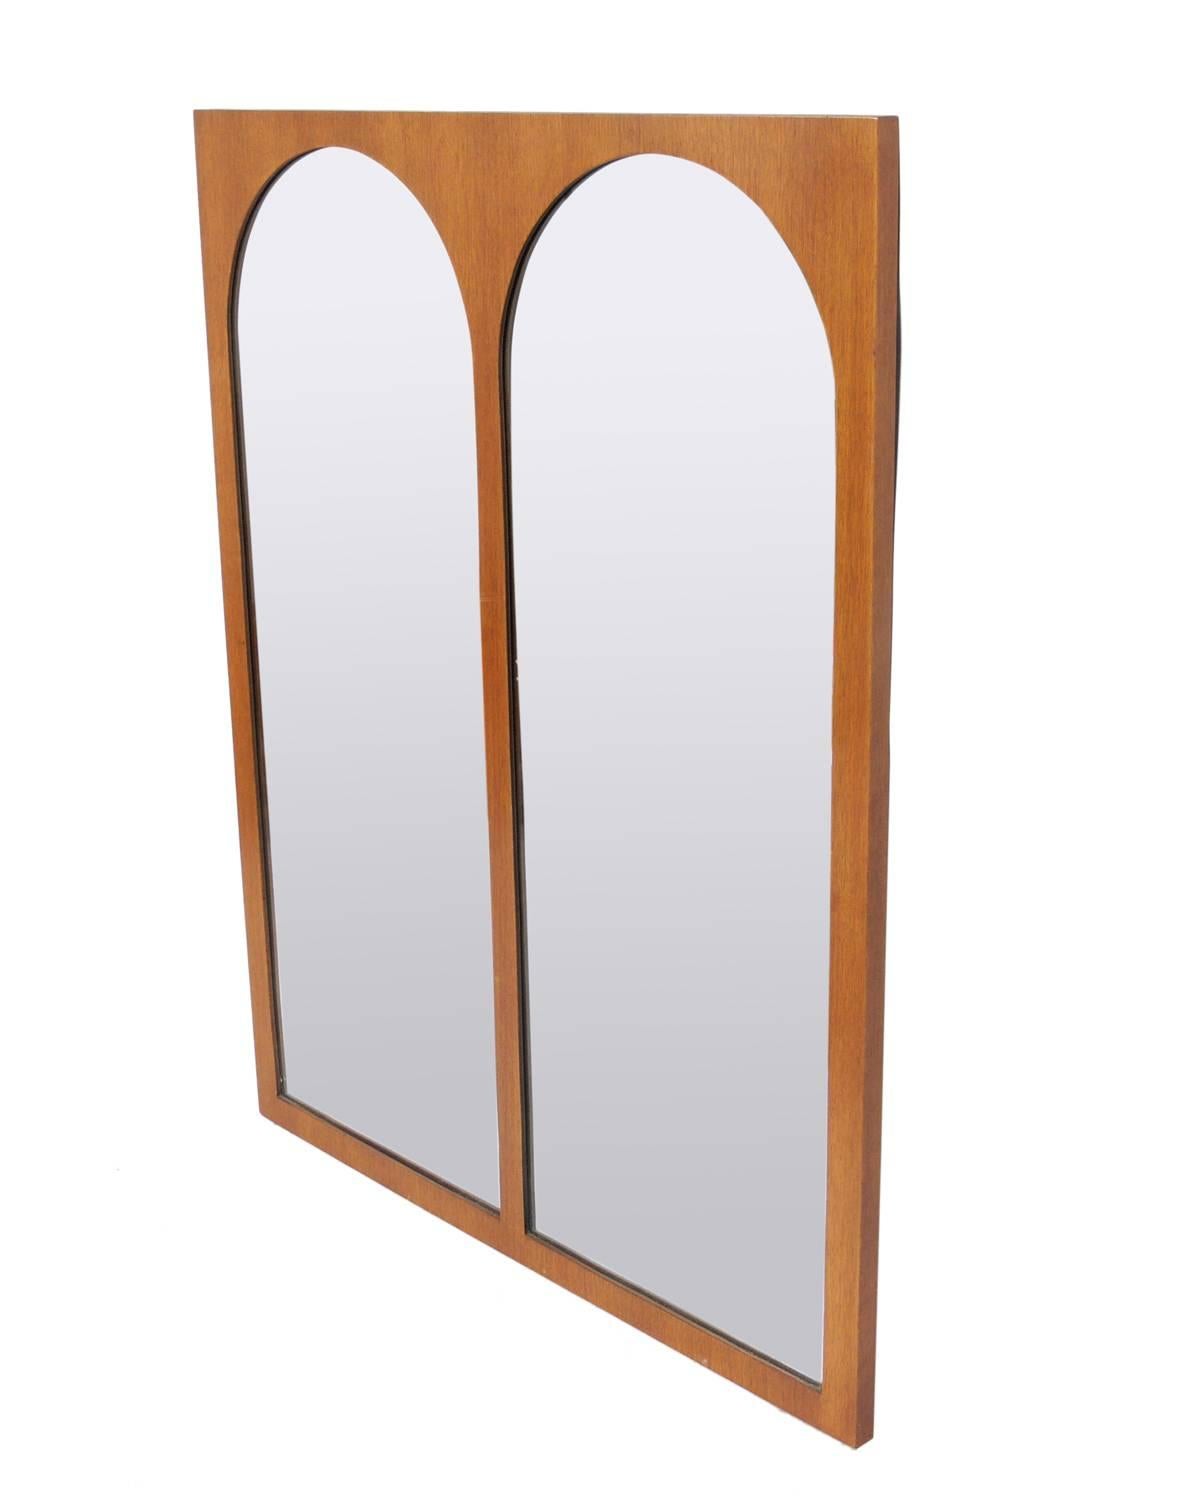 Arched walnut coliseum mirror, designed by T.H. Robsjohn Gibbings for Widdicomb, American, circa 1950s.